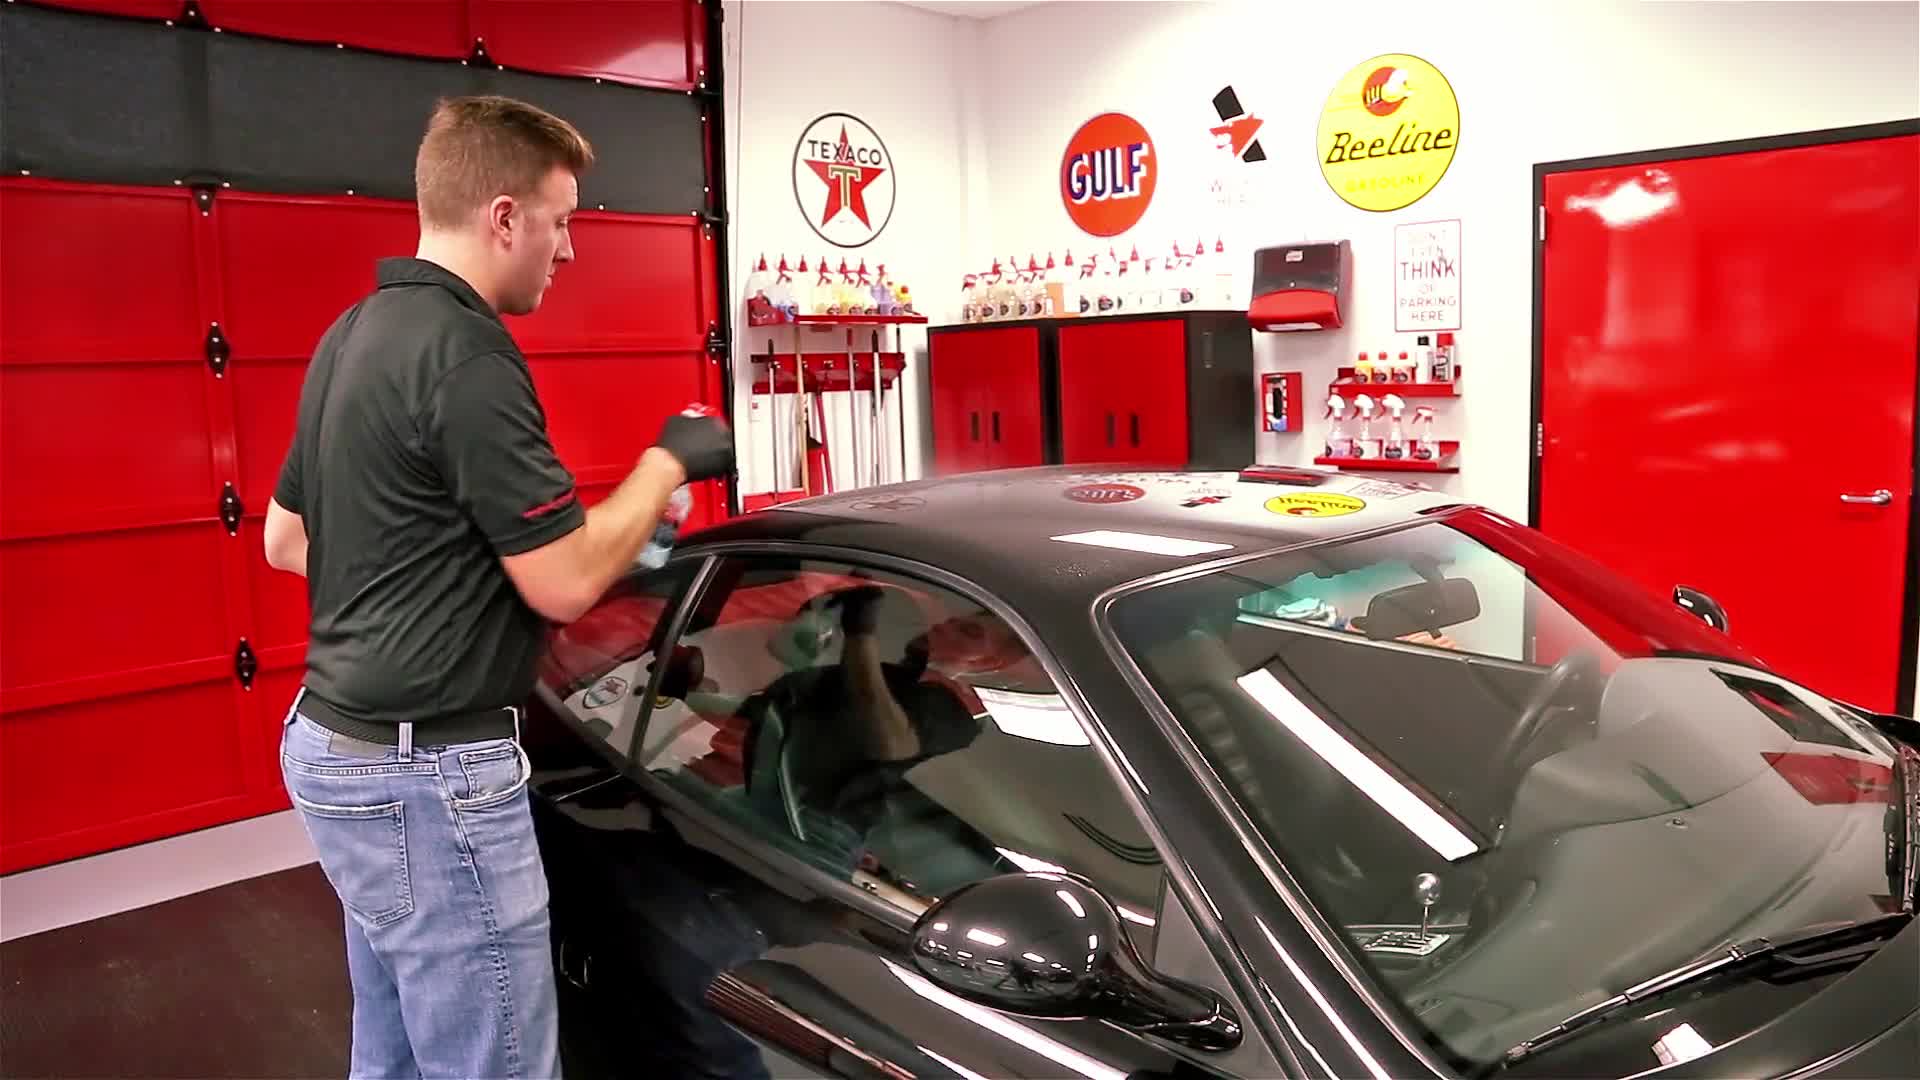 The Best Car Wax To Achieve a Gleaming, Showroom-Worthy Finish in 2021 – SPY